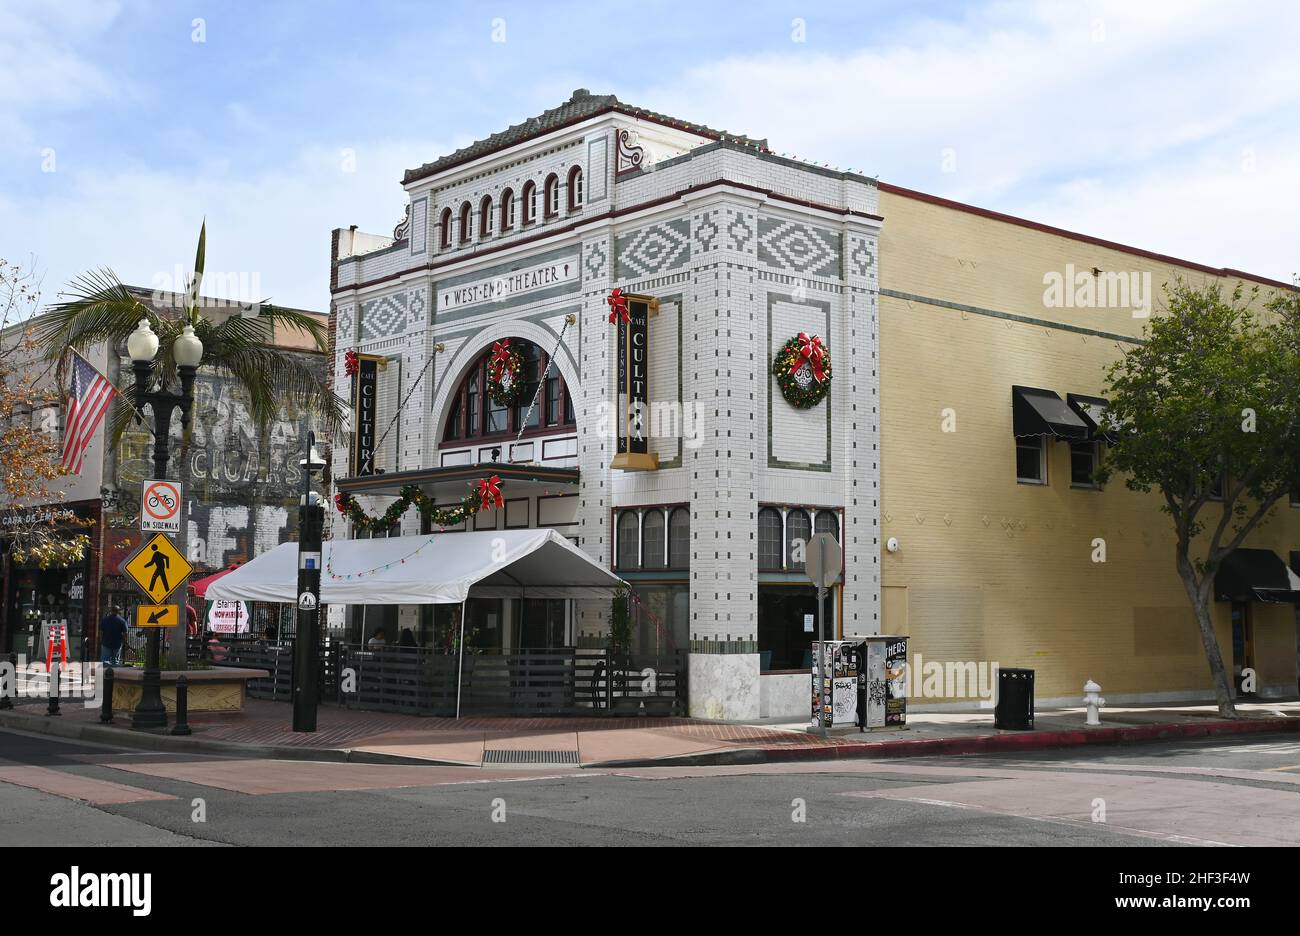 SANTA ANA, CALIFORNIA - 12 JAN 2022: Cafe Cultura, casual Mexican fare, espresso drinks and handcrafted sodas in the old West End Theater Building. Stock Photo